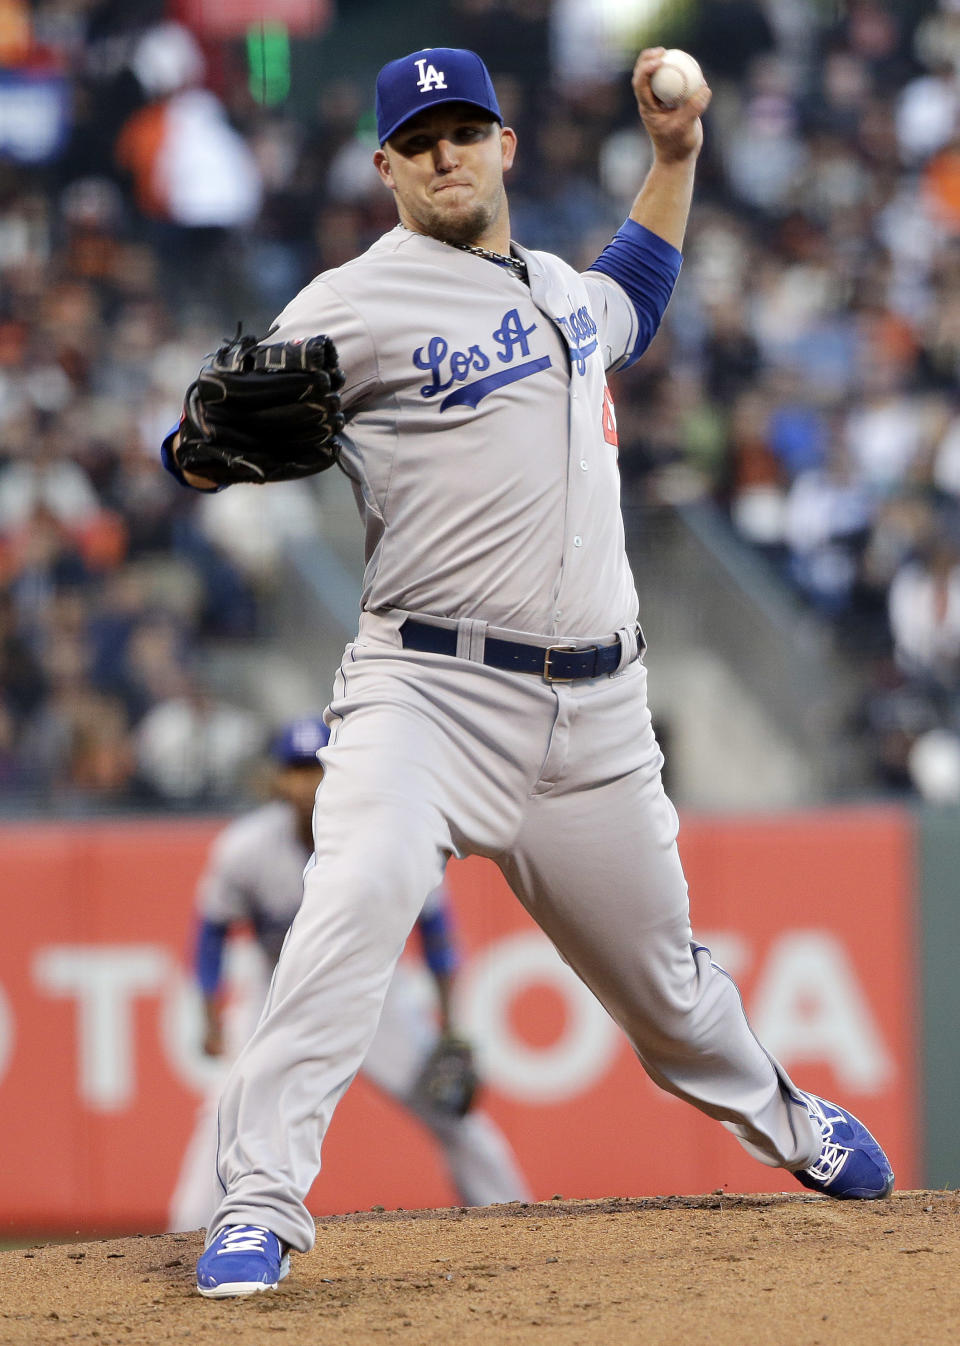 Los Angeles Dodgers starter Paul Maholm throws to the San Francisco Giants during the first inning of a baseball game Wednesday, April 16, 2014, in San Francisco. (AP Photo/Marcio Jose Sanchez)